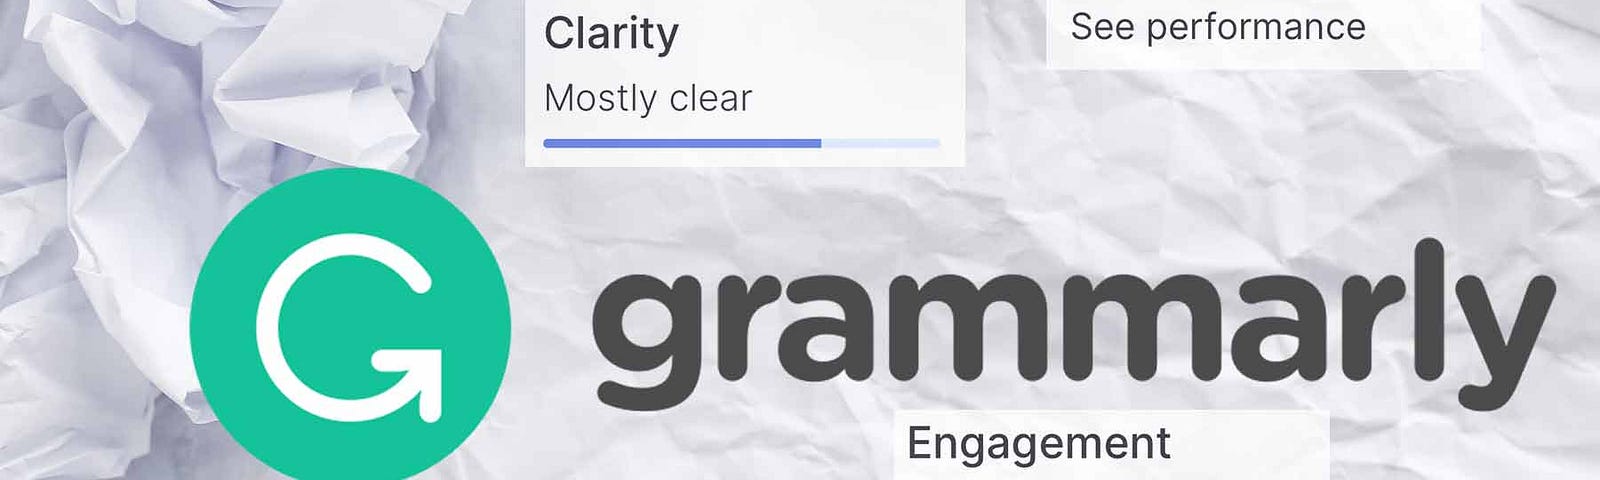 The Grammarly logo and poor scoring report details sit atop crumpled pieces of writing paper.